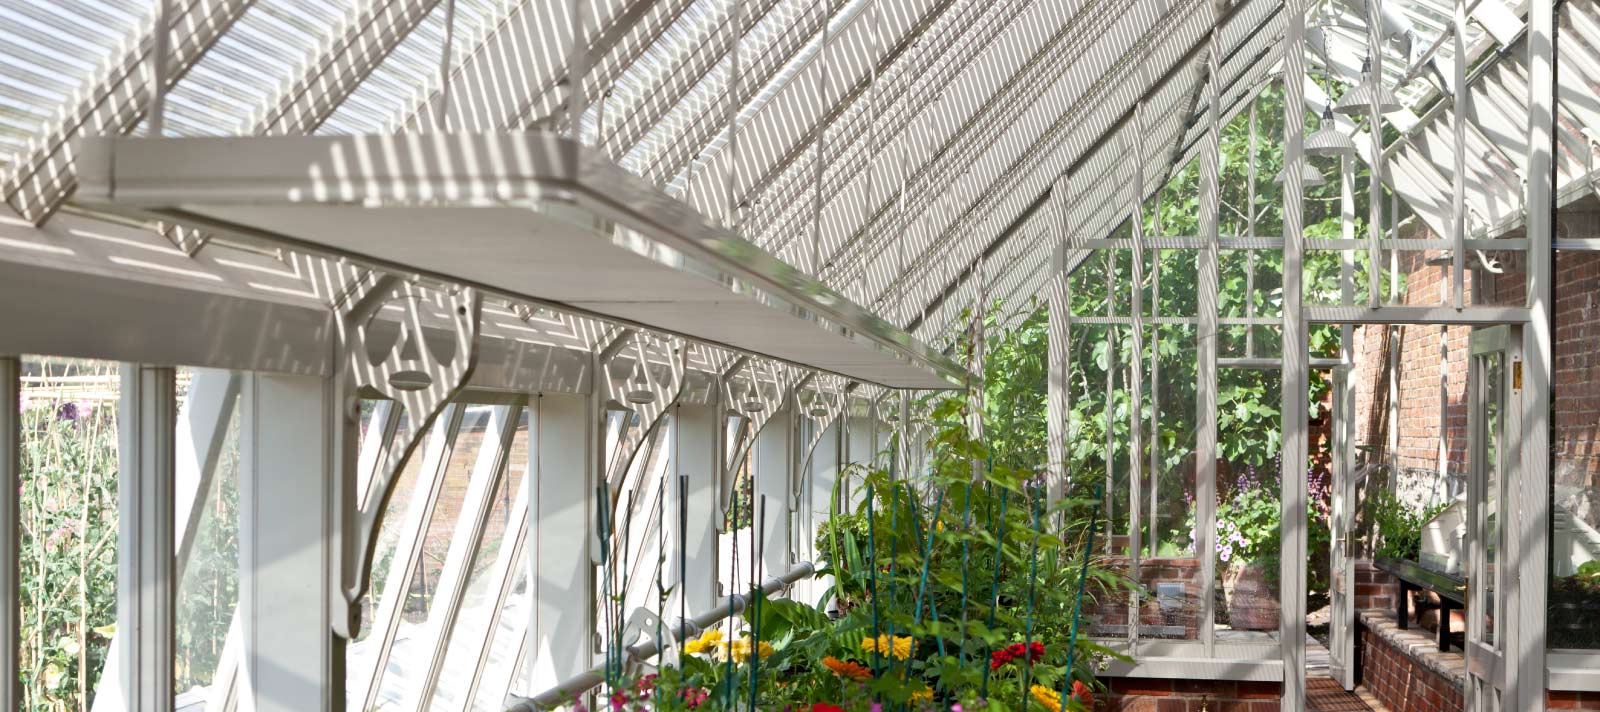 Messenger glazing system in victorian glasshouse